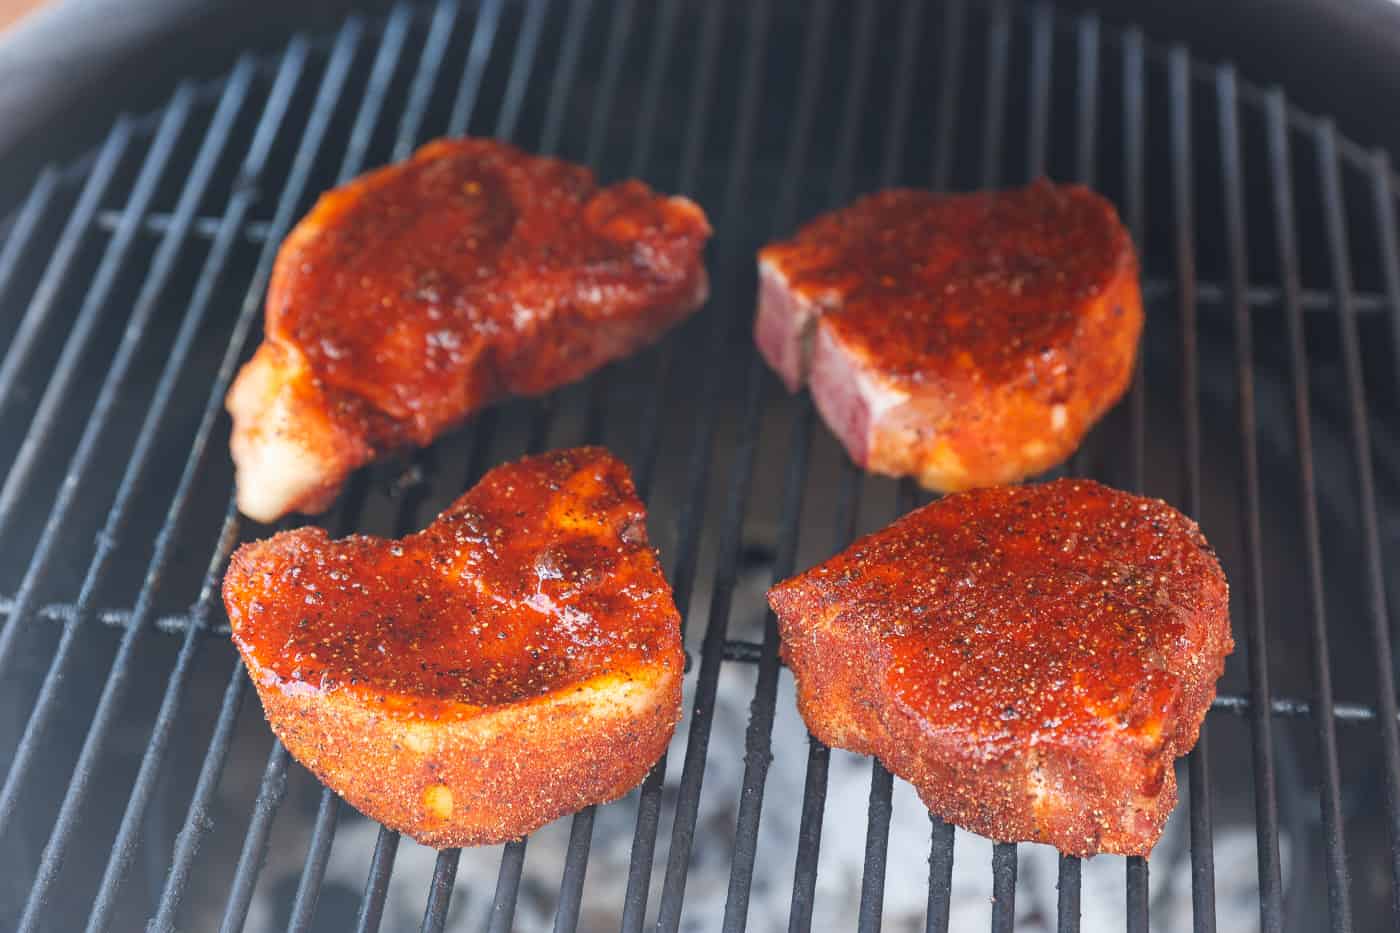 4 pork chops on the grill cooking